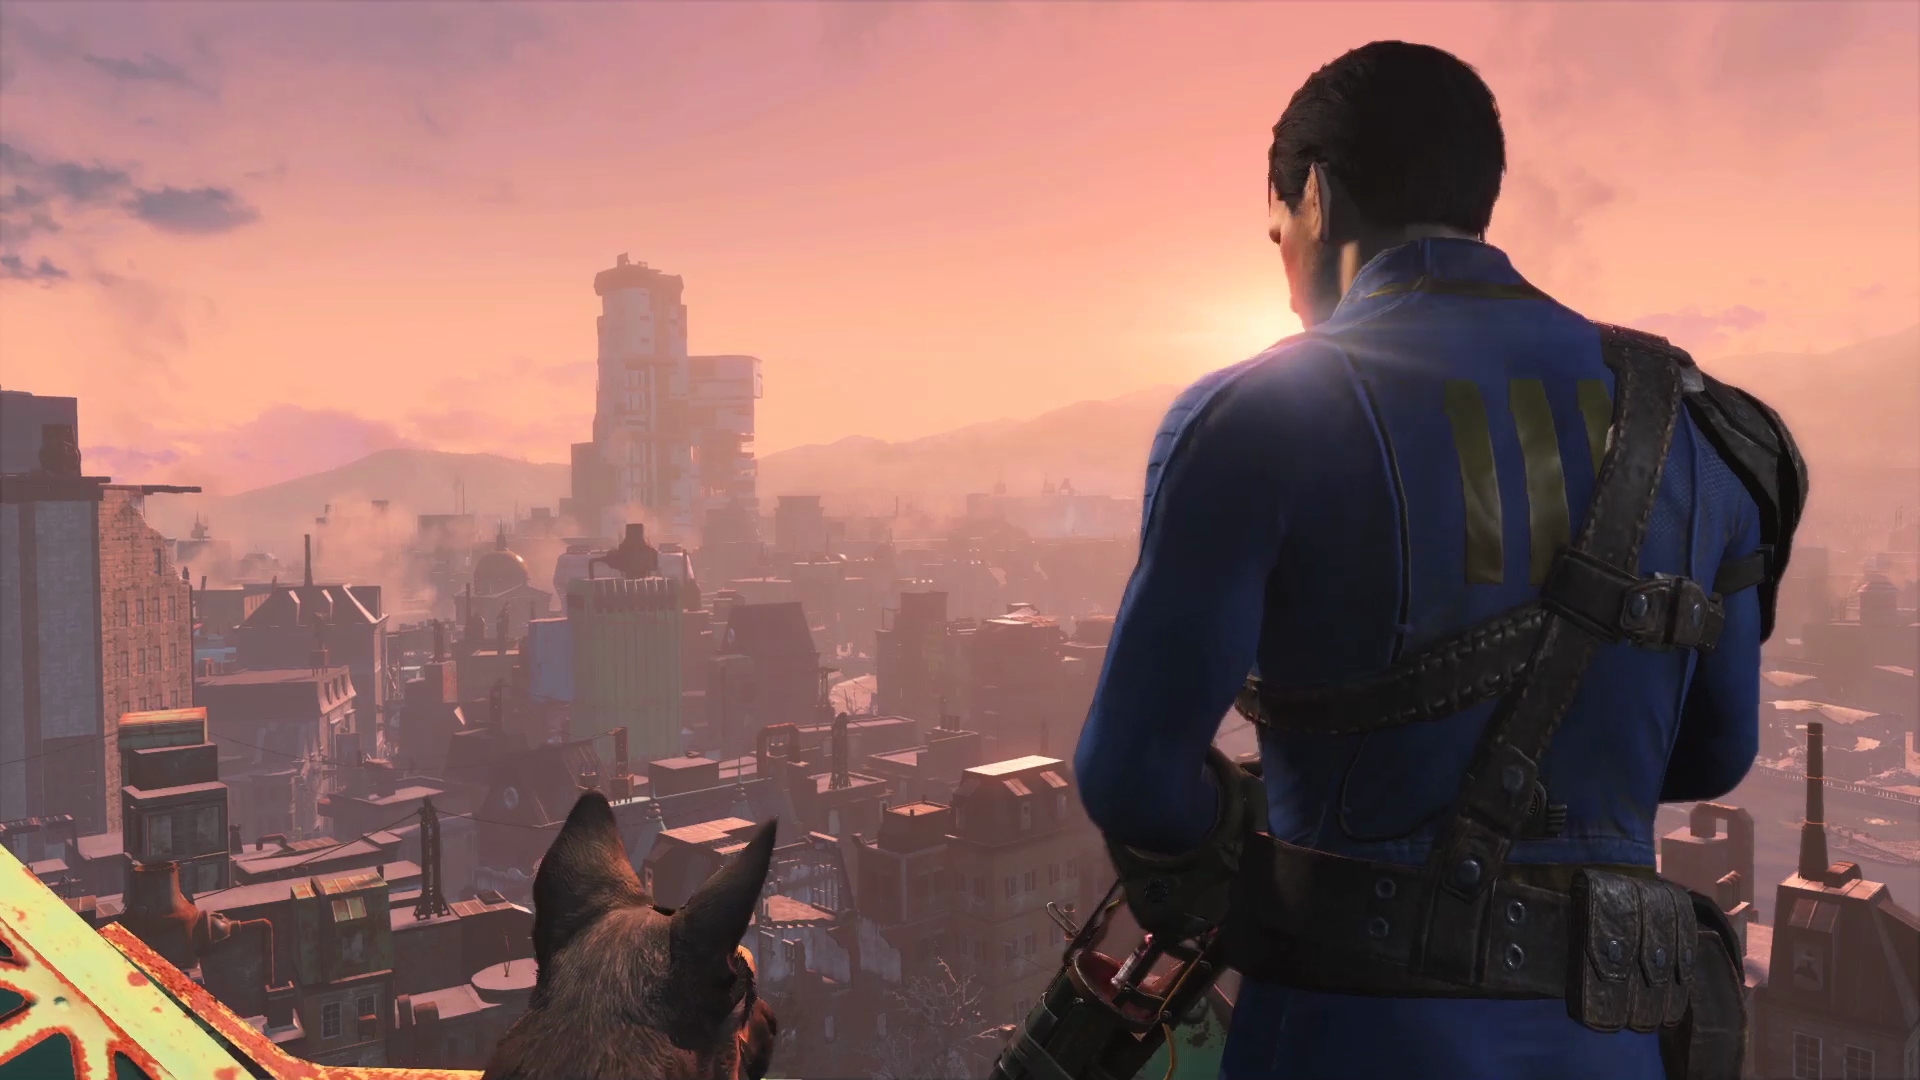 “Fallout 4” Won’t Have Any Exclusive DLC - Whole Experience for Any Platform